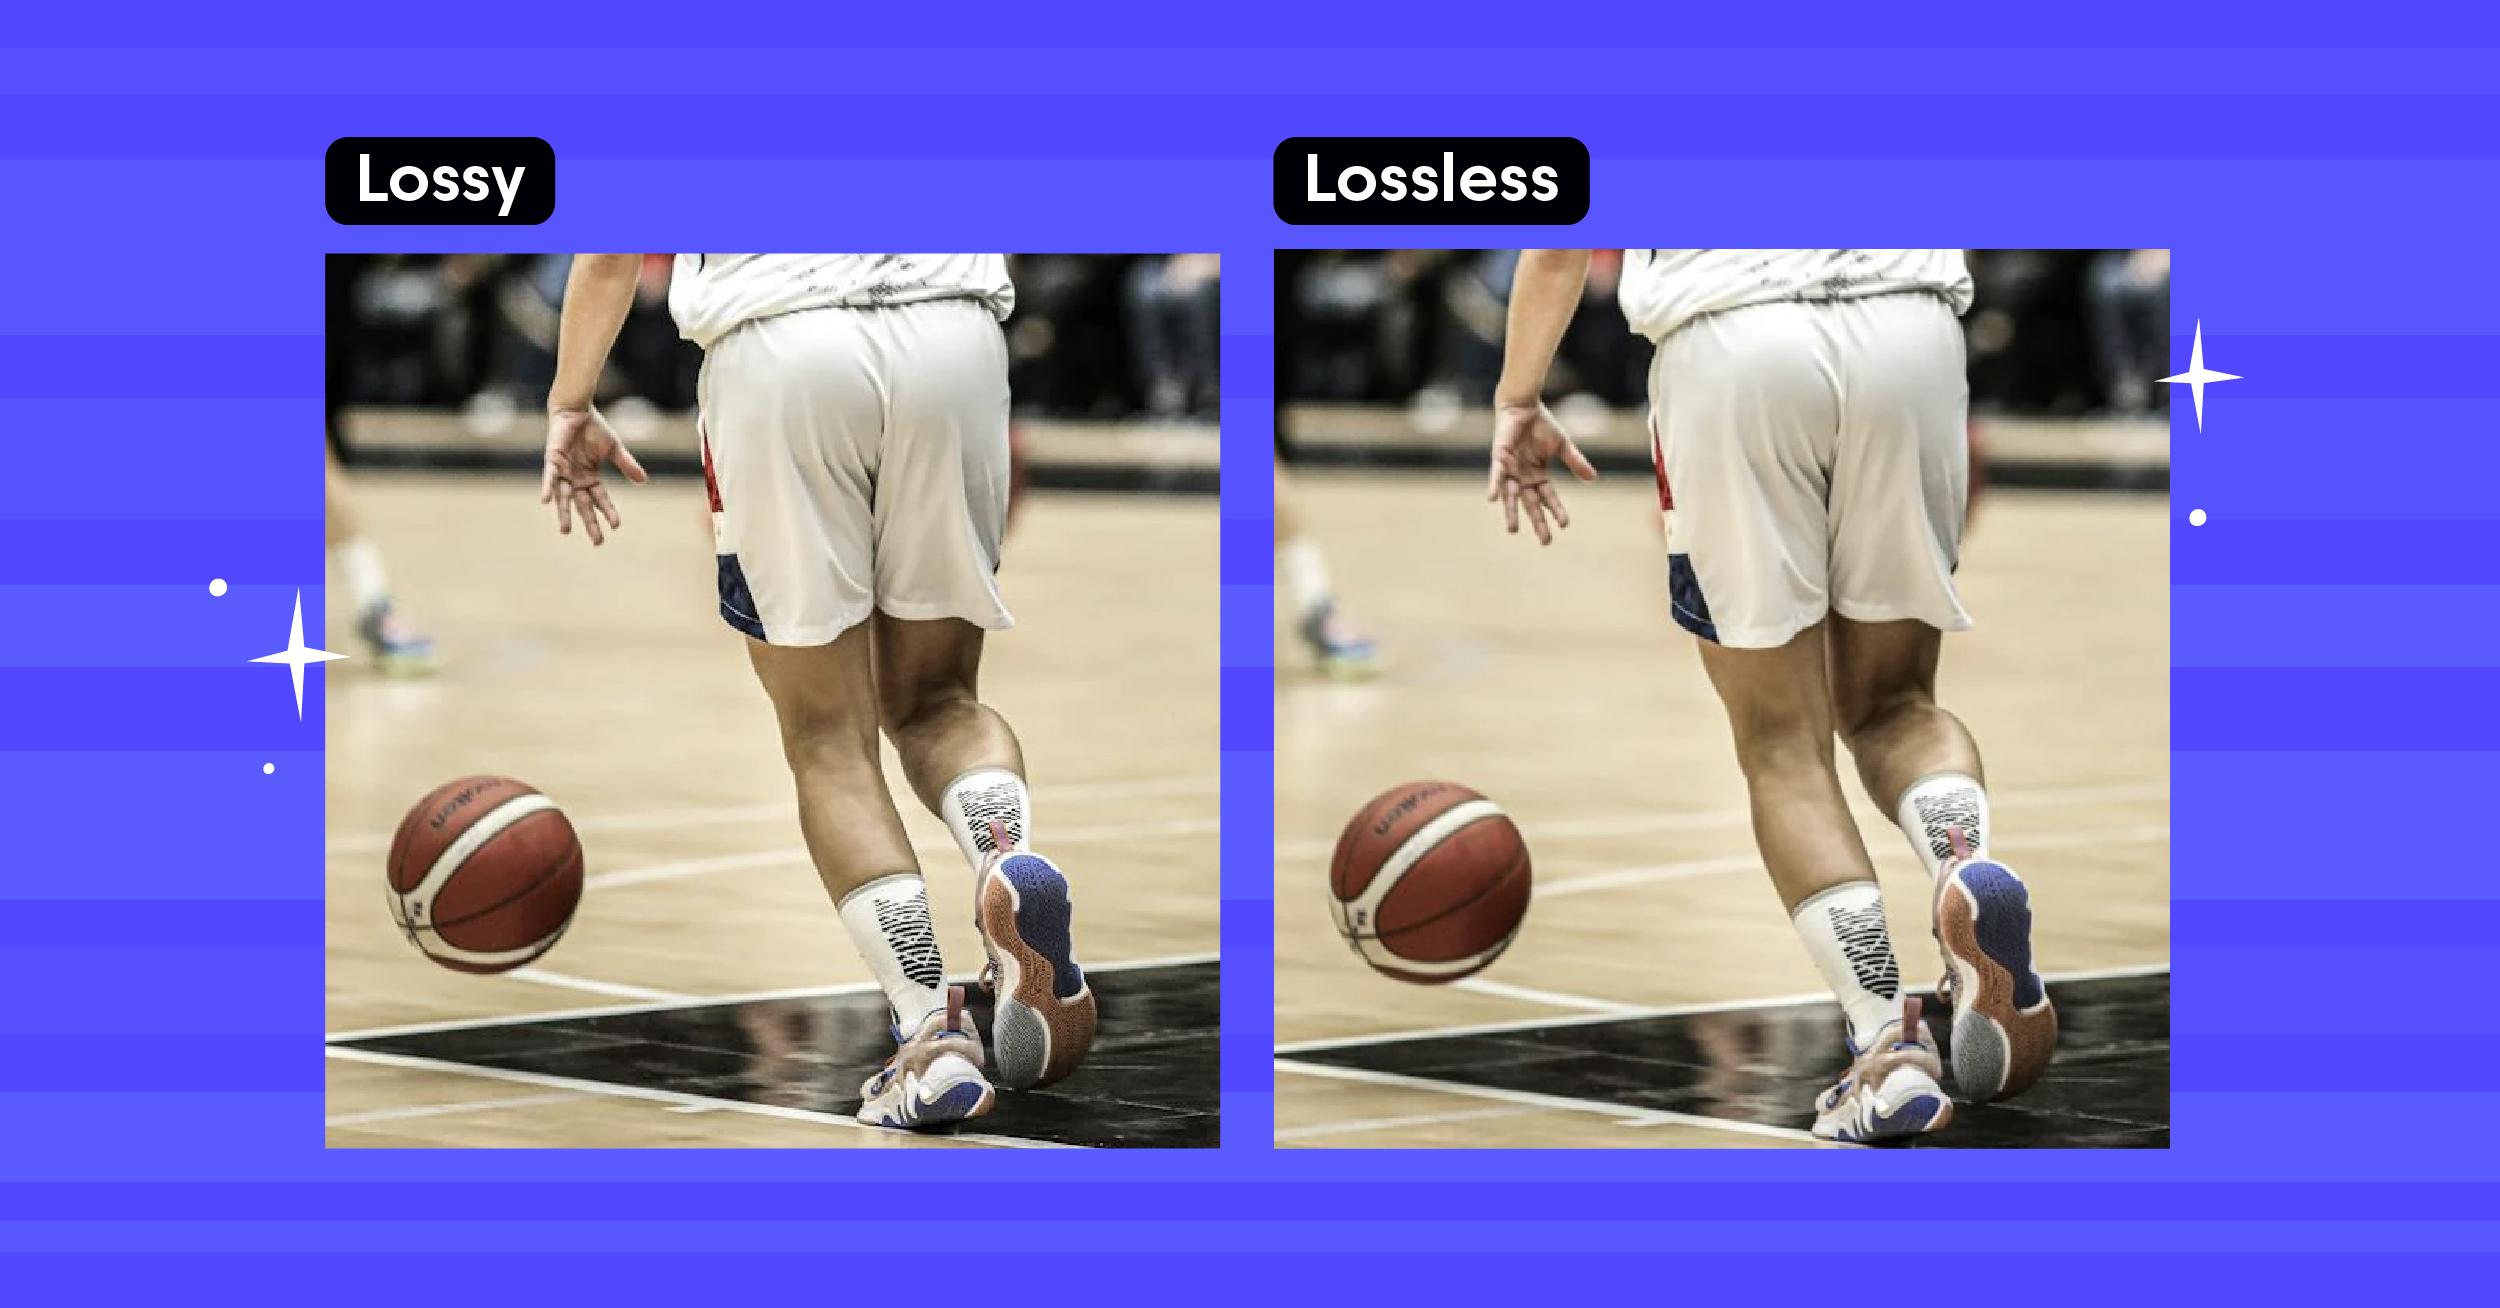 Lossy vs Lossless Video Compression: What’s the Difference?